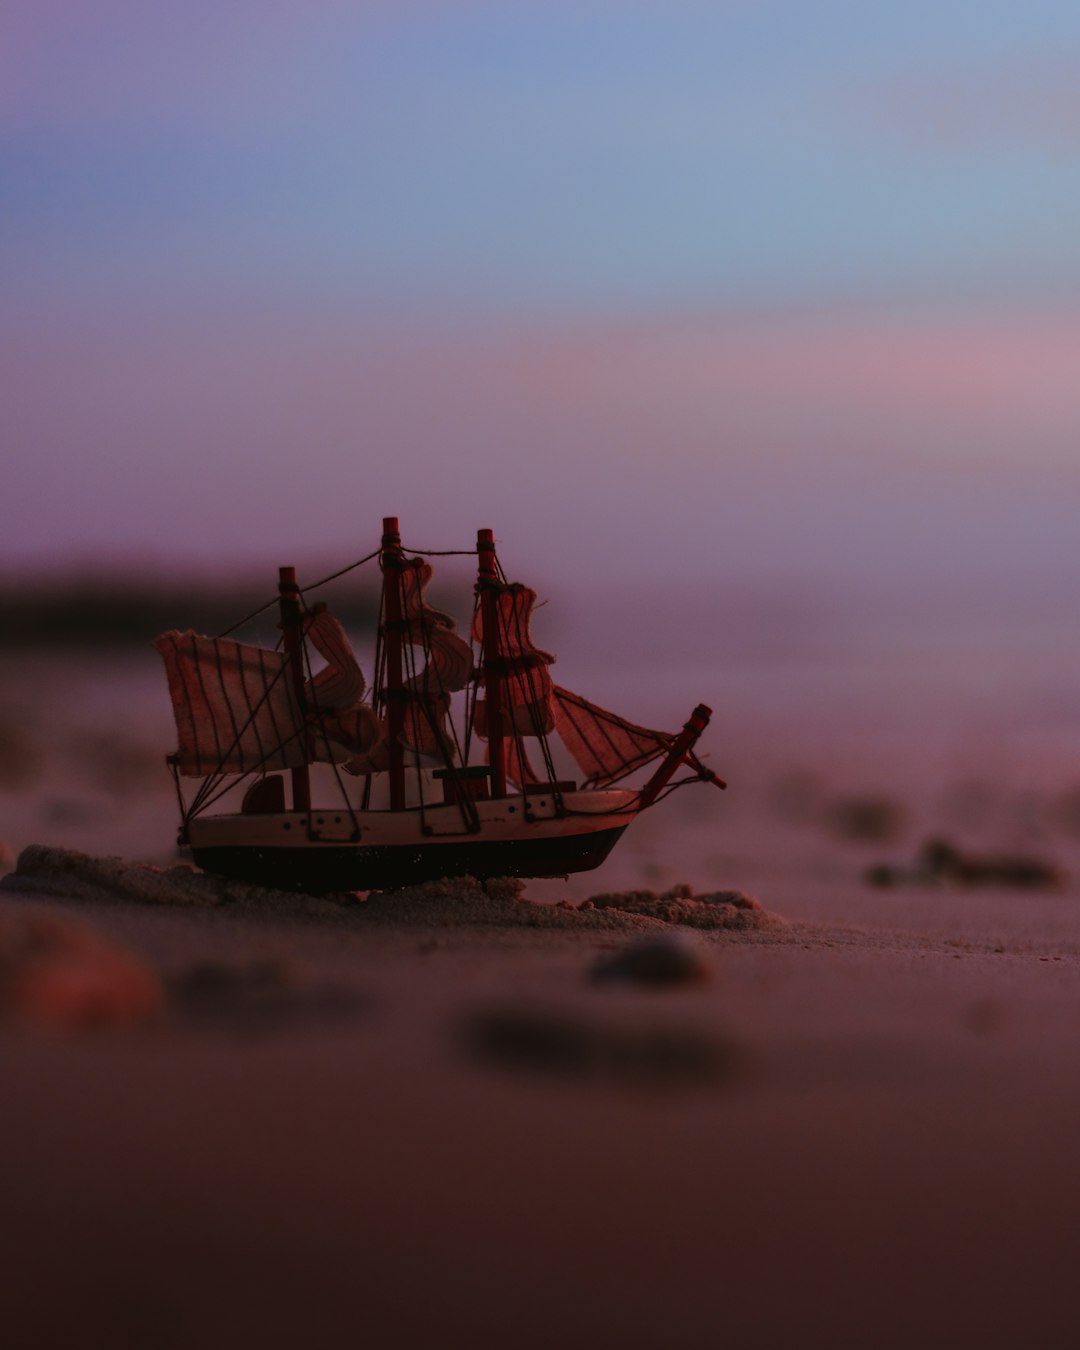 brown and white ship miniature by the seashore